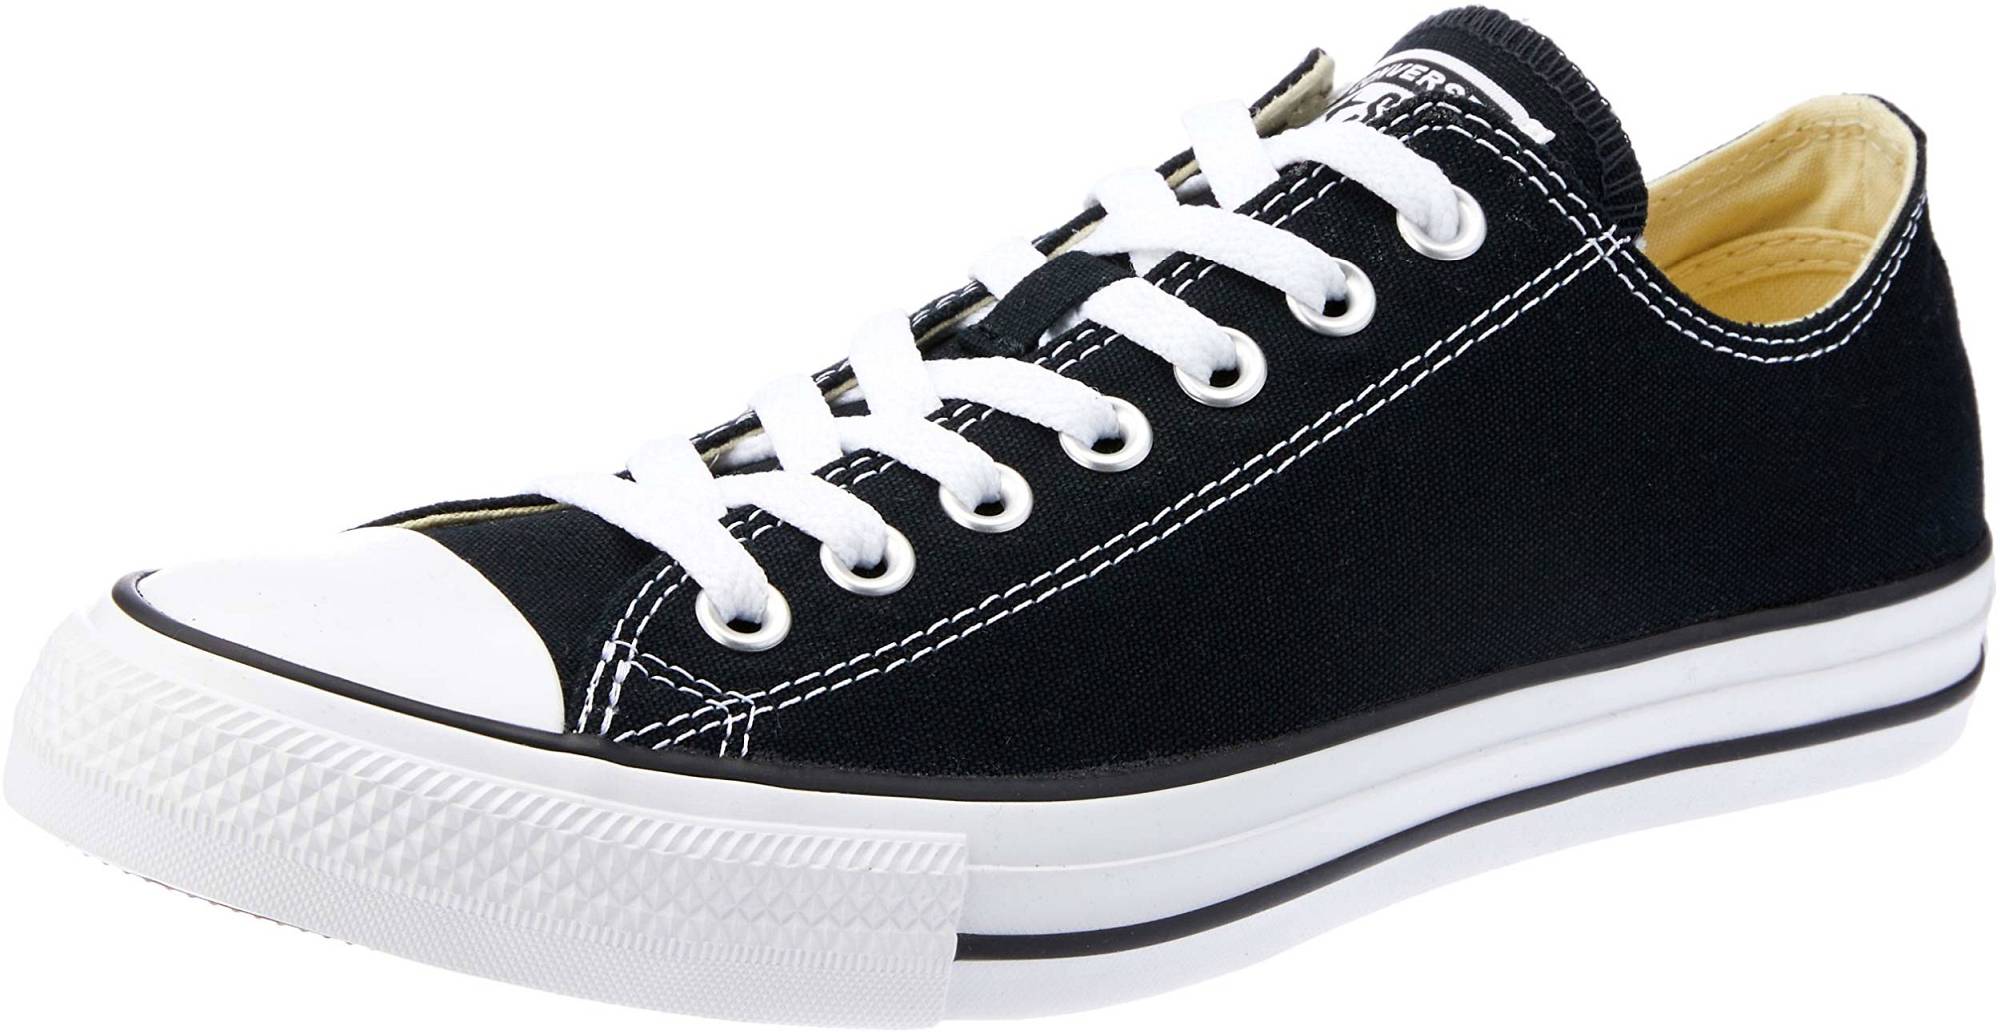 Converse Chuck Taylor All Star Core Ox – Shoes Reviews & Reasons To Buy